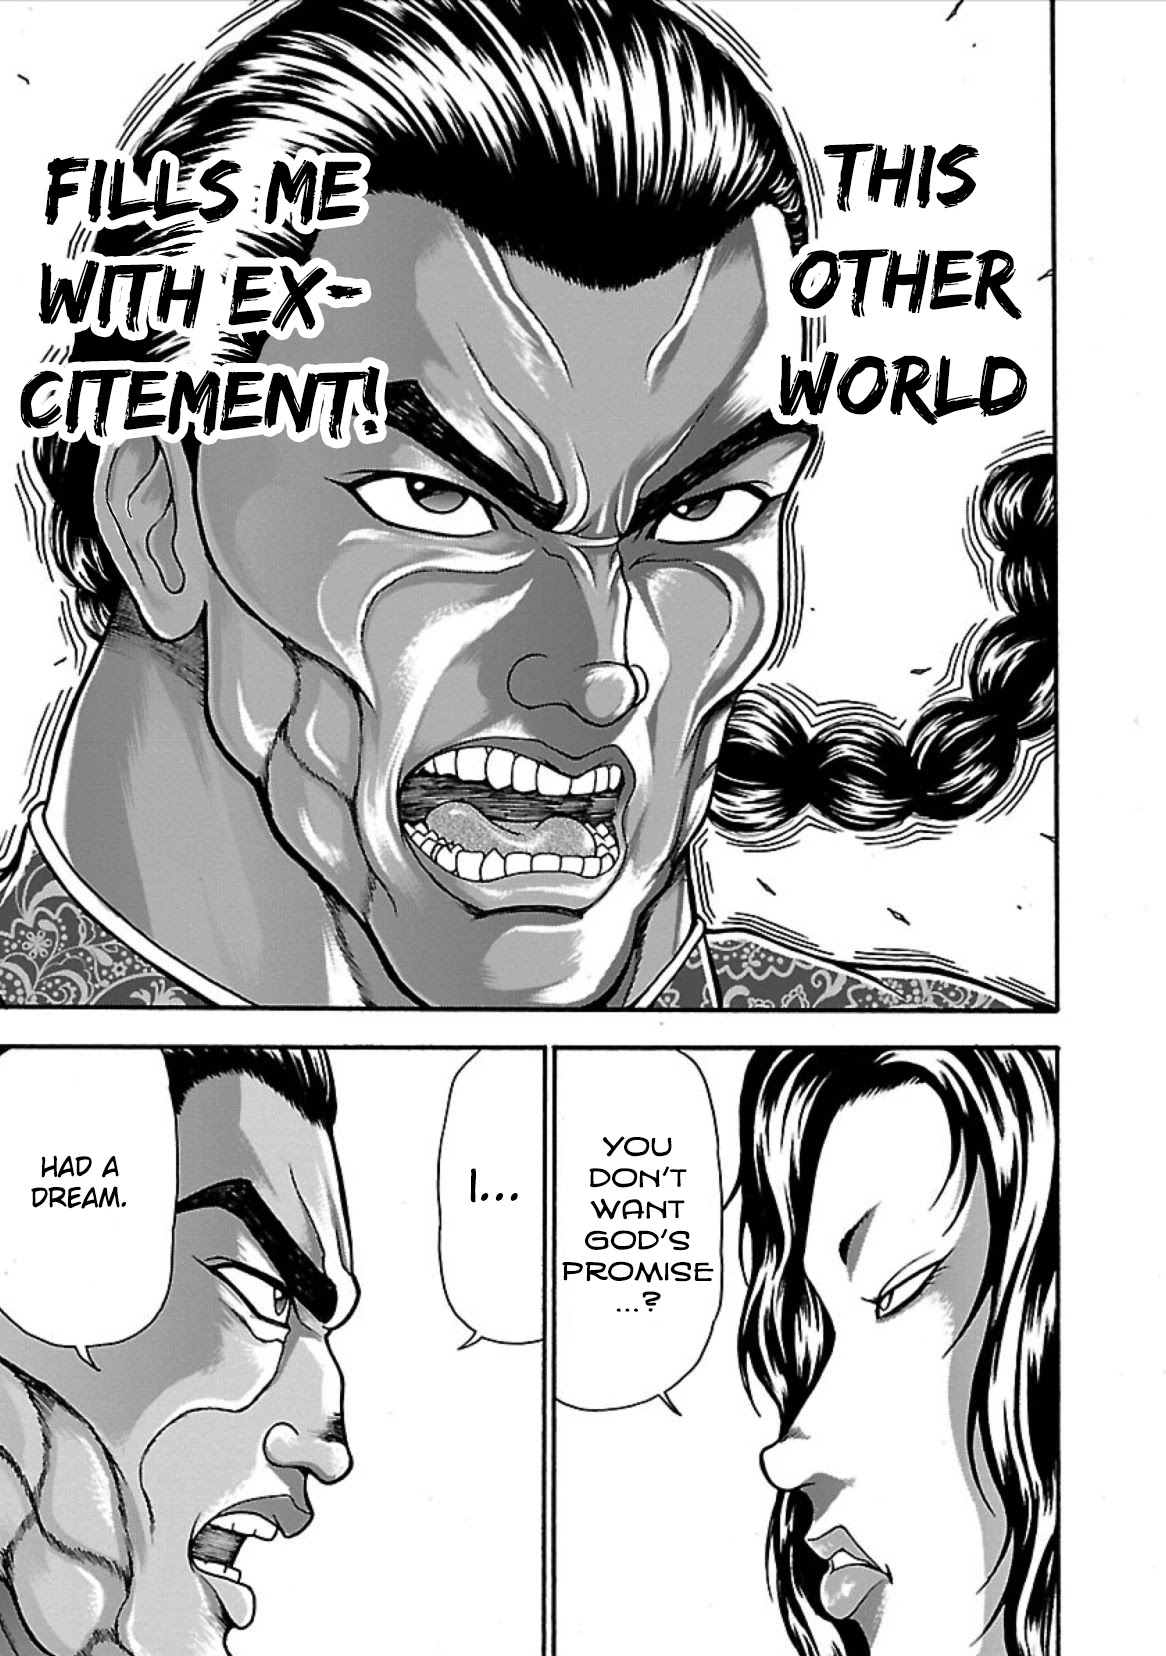 Baki Side Story - Retsu Kaioh Doesn't Mind Even If It's In Another World - 8 page 16